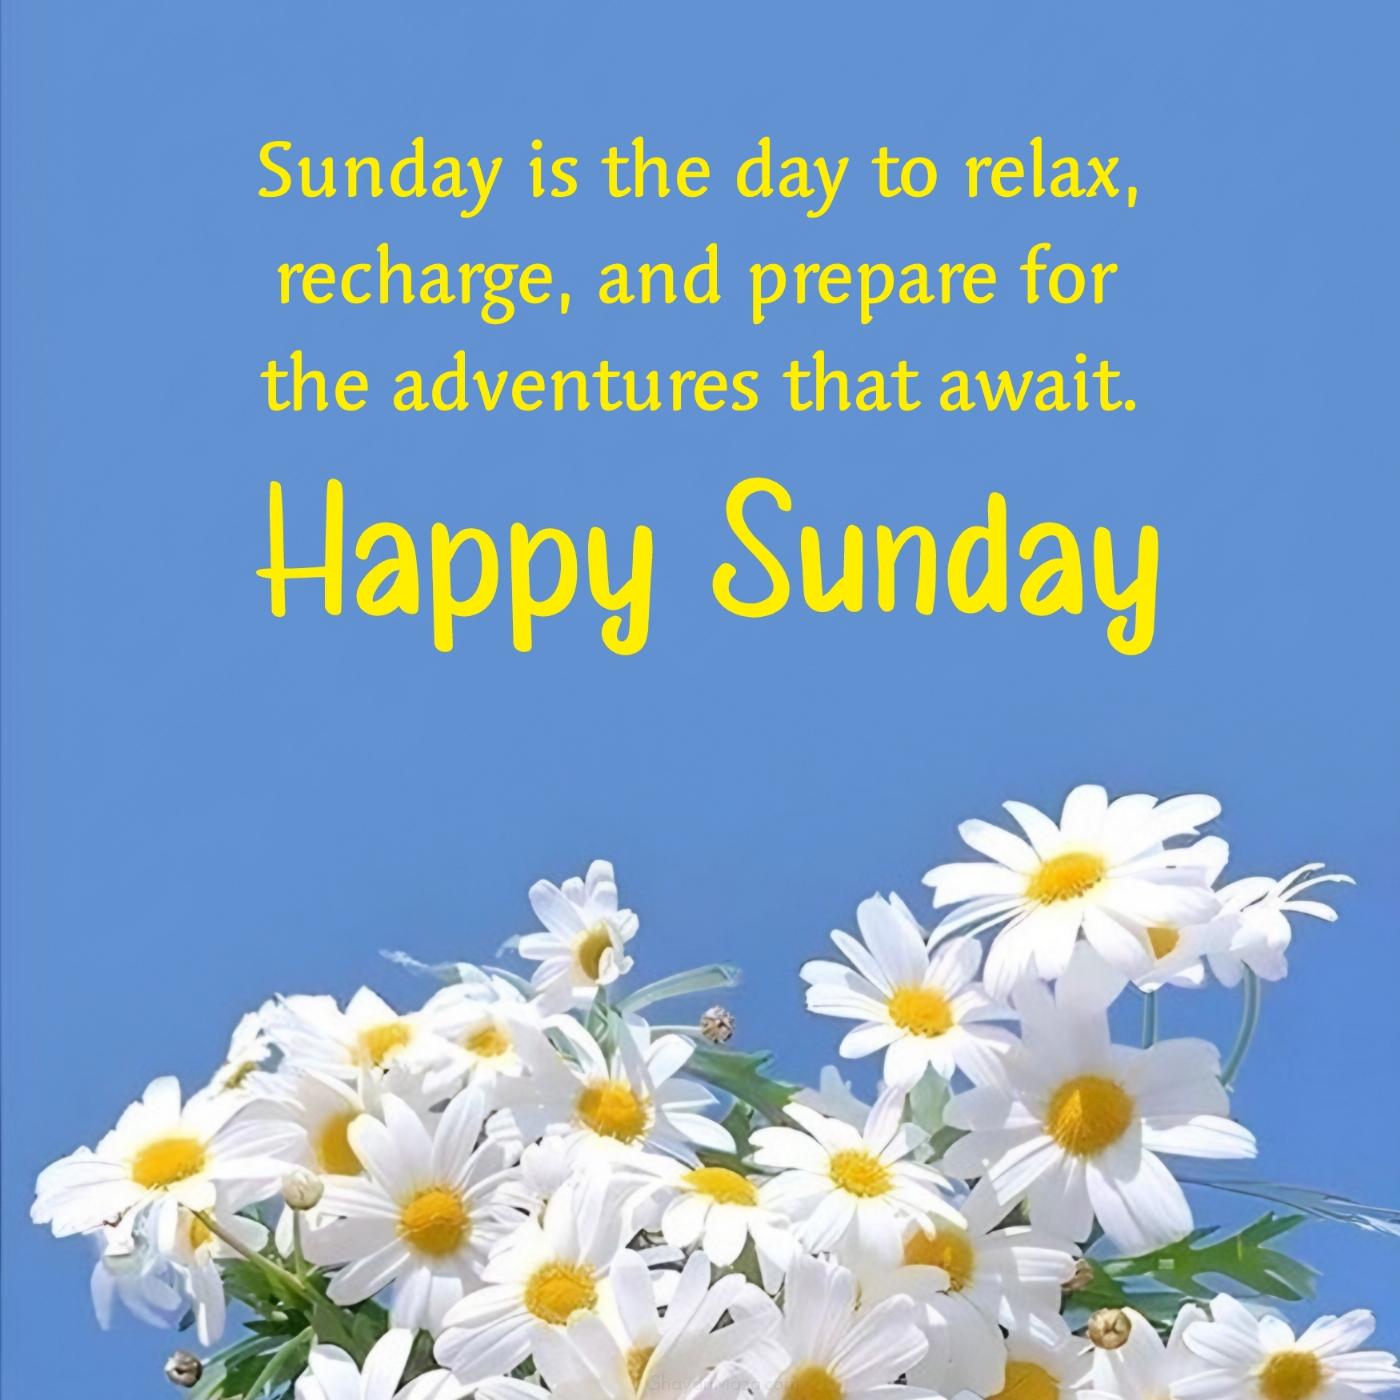 Sunday is the day to relax recharge and prepare for the adventures